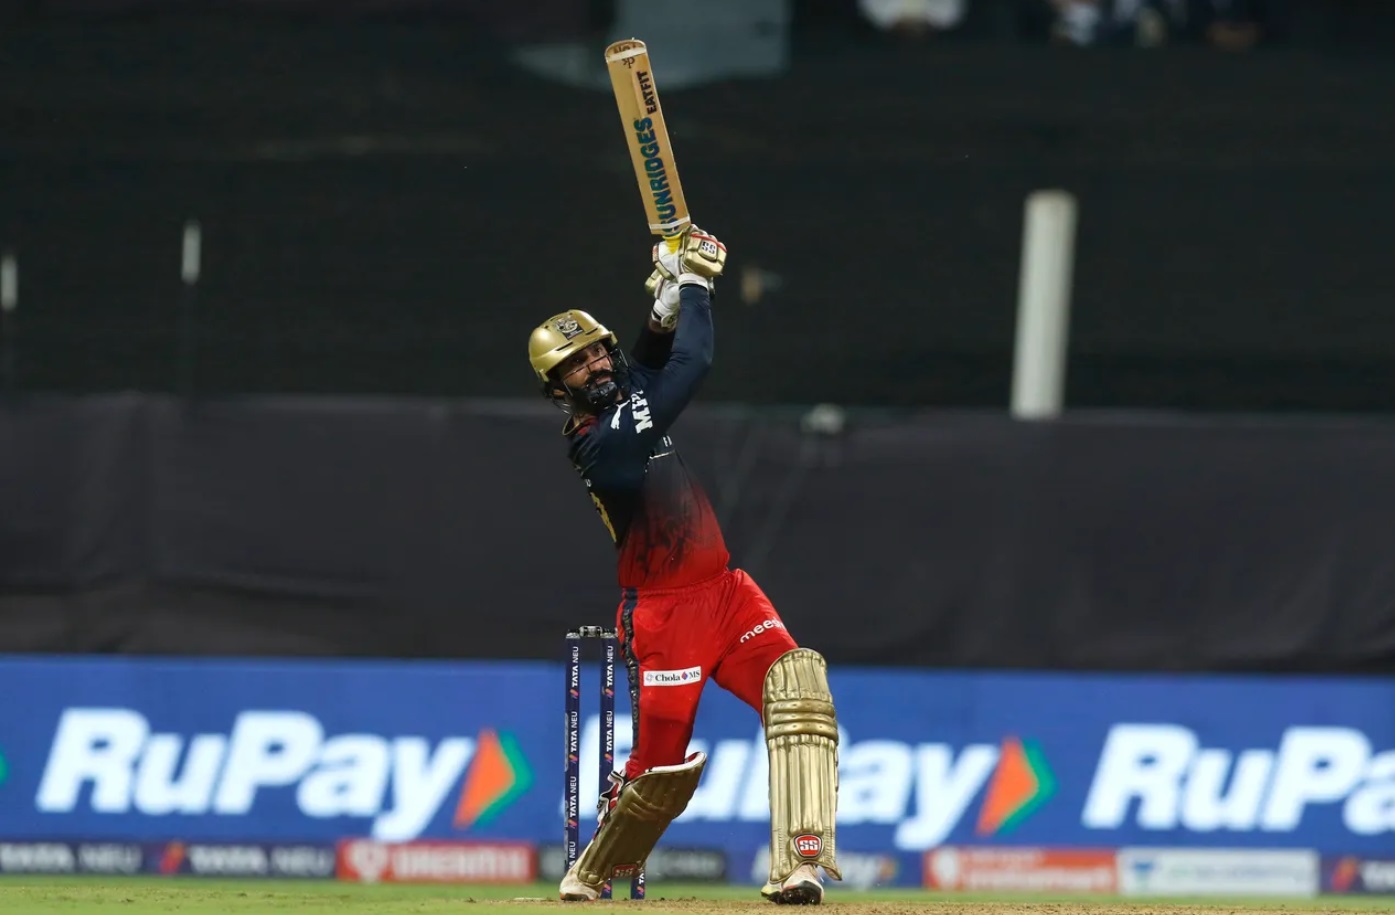 IPL 2022 | Dinesh Karthik evolved as a finisher and will perform well for India too, says Siddharth Kaul